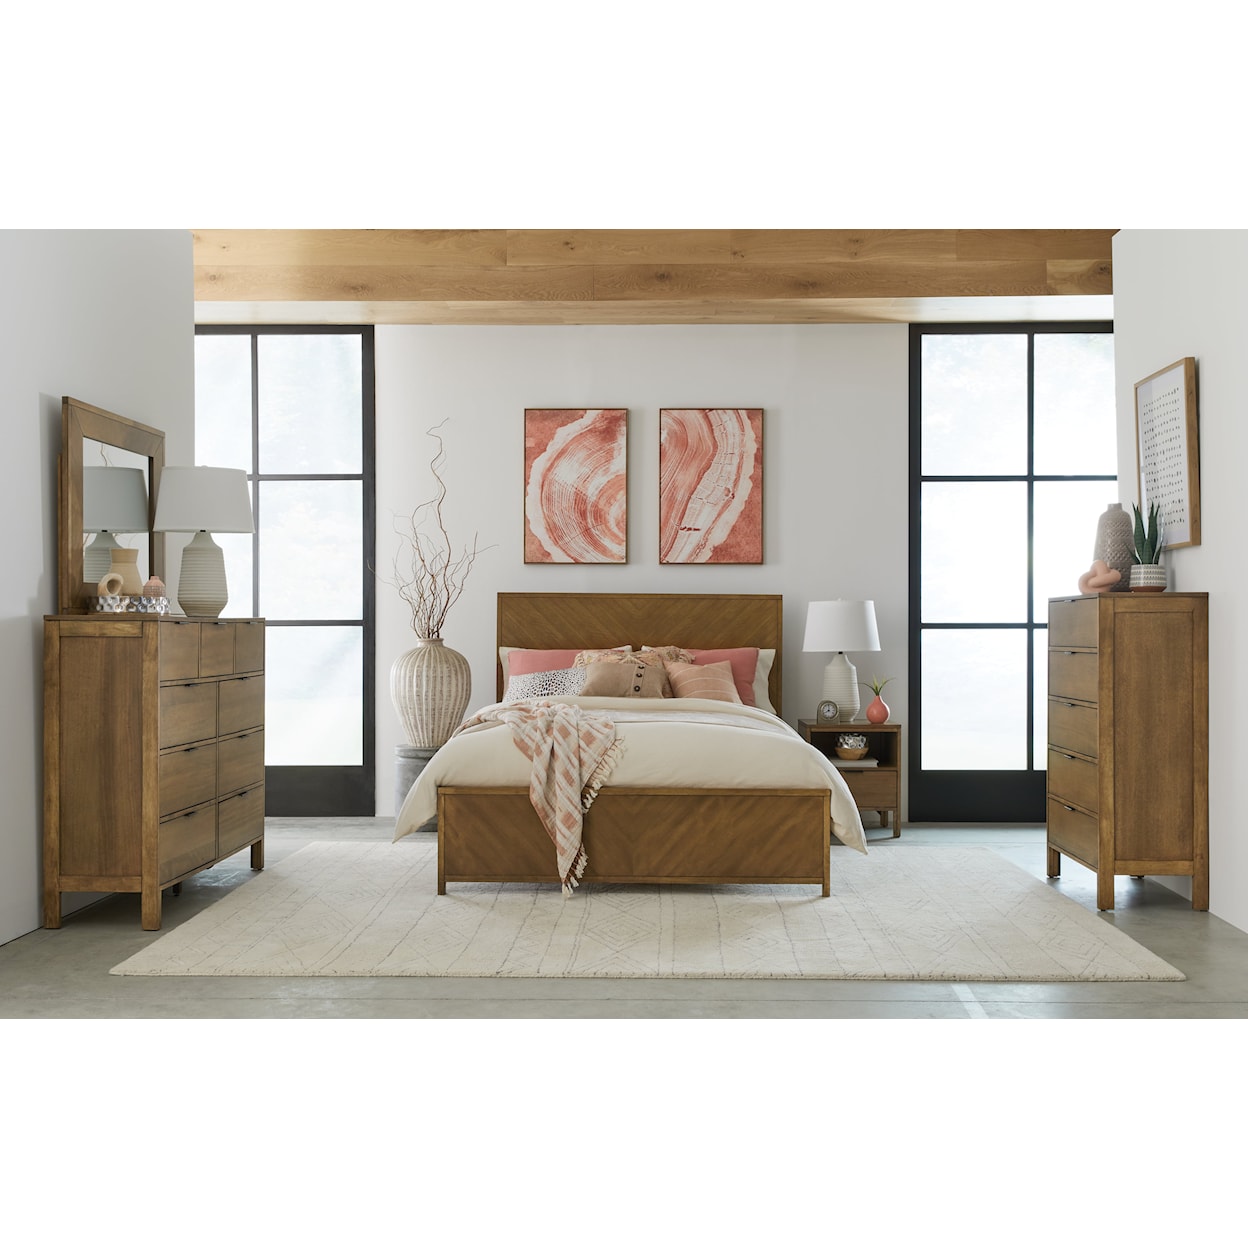 Carolina Chairs Strategy 5-Piece Queen Bedroom Set